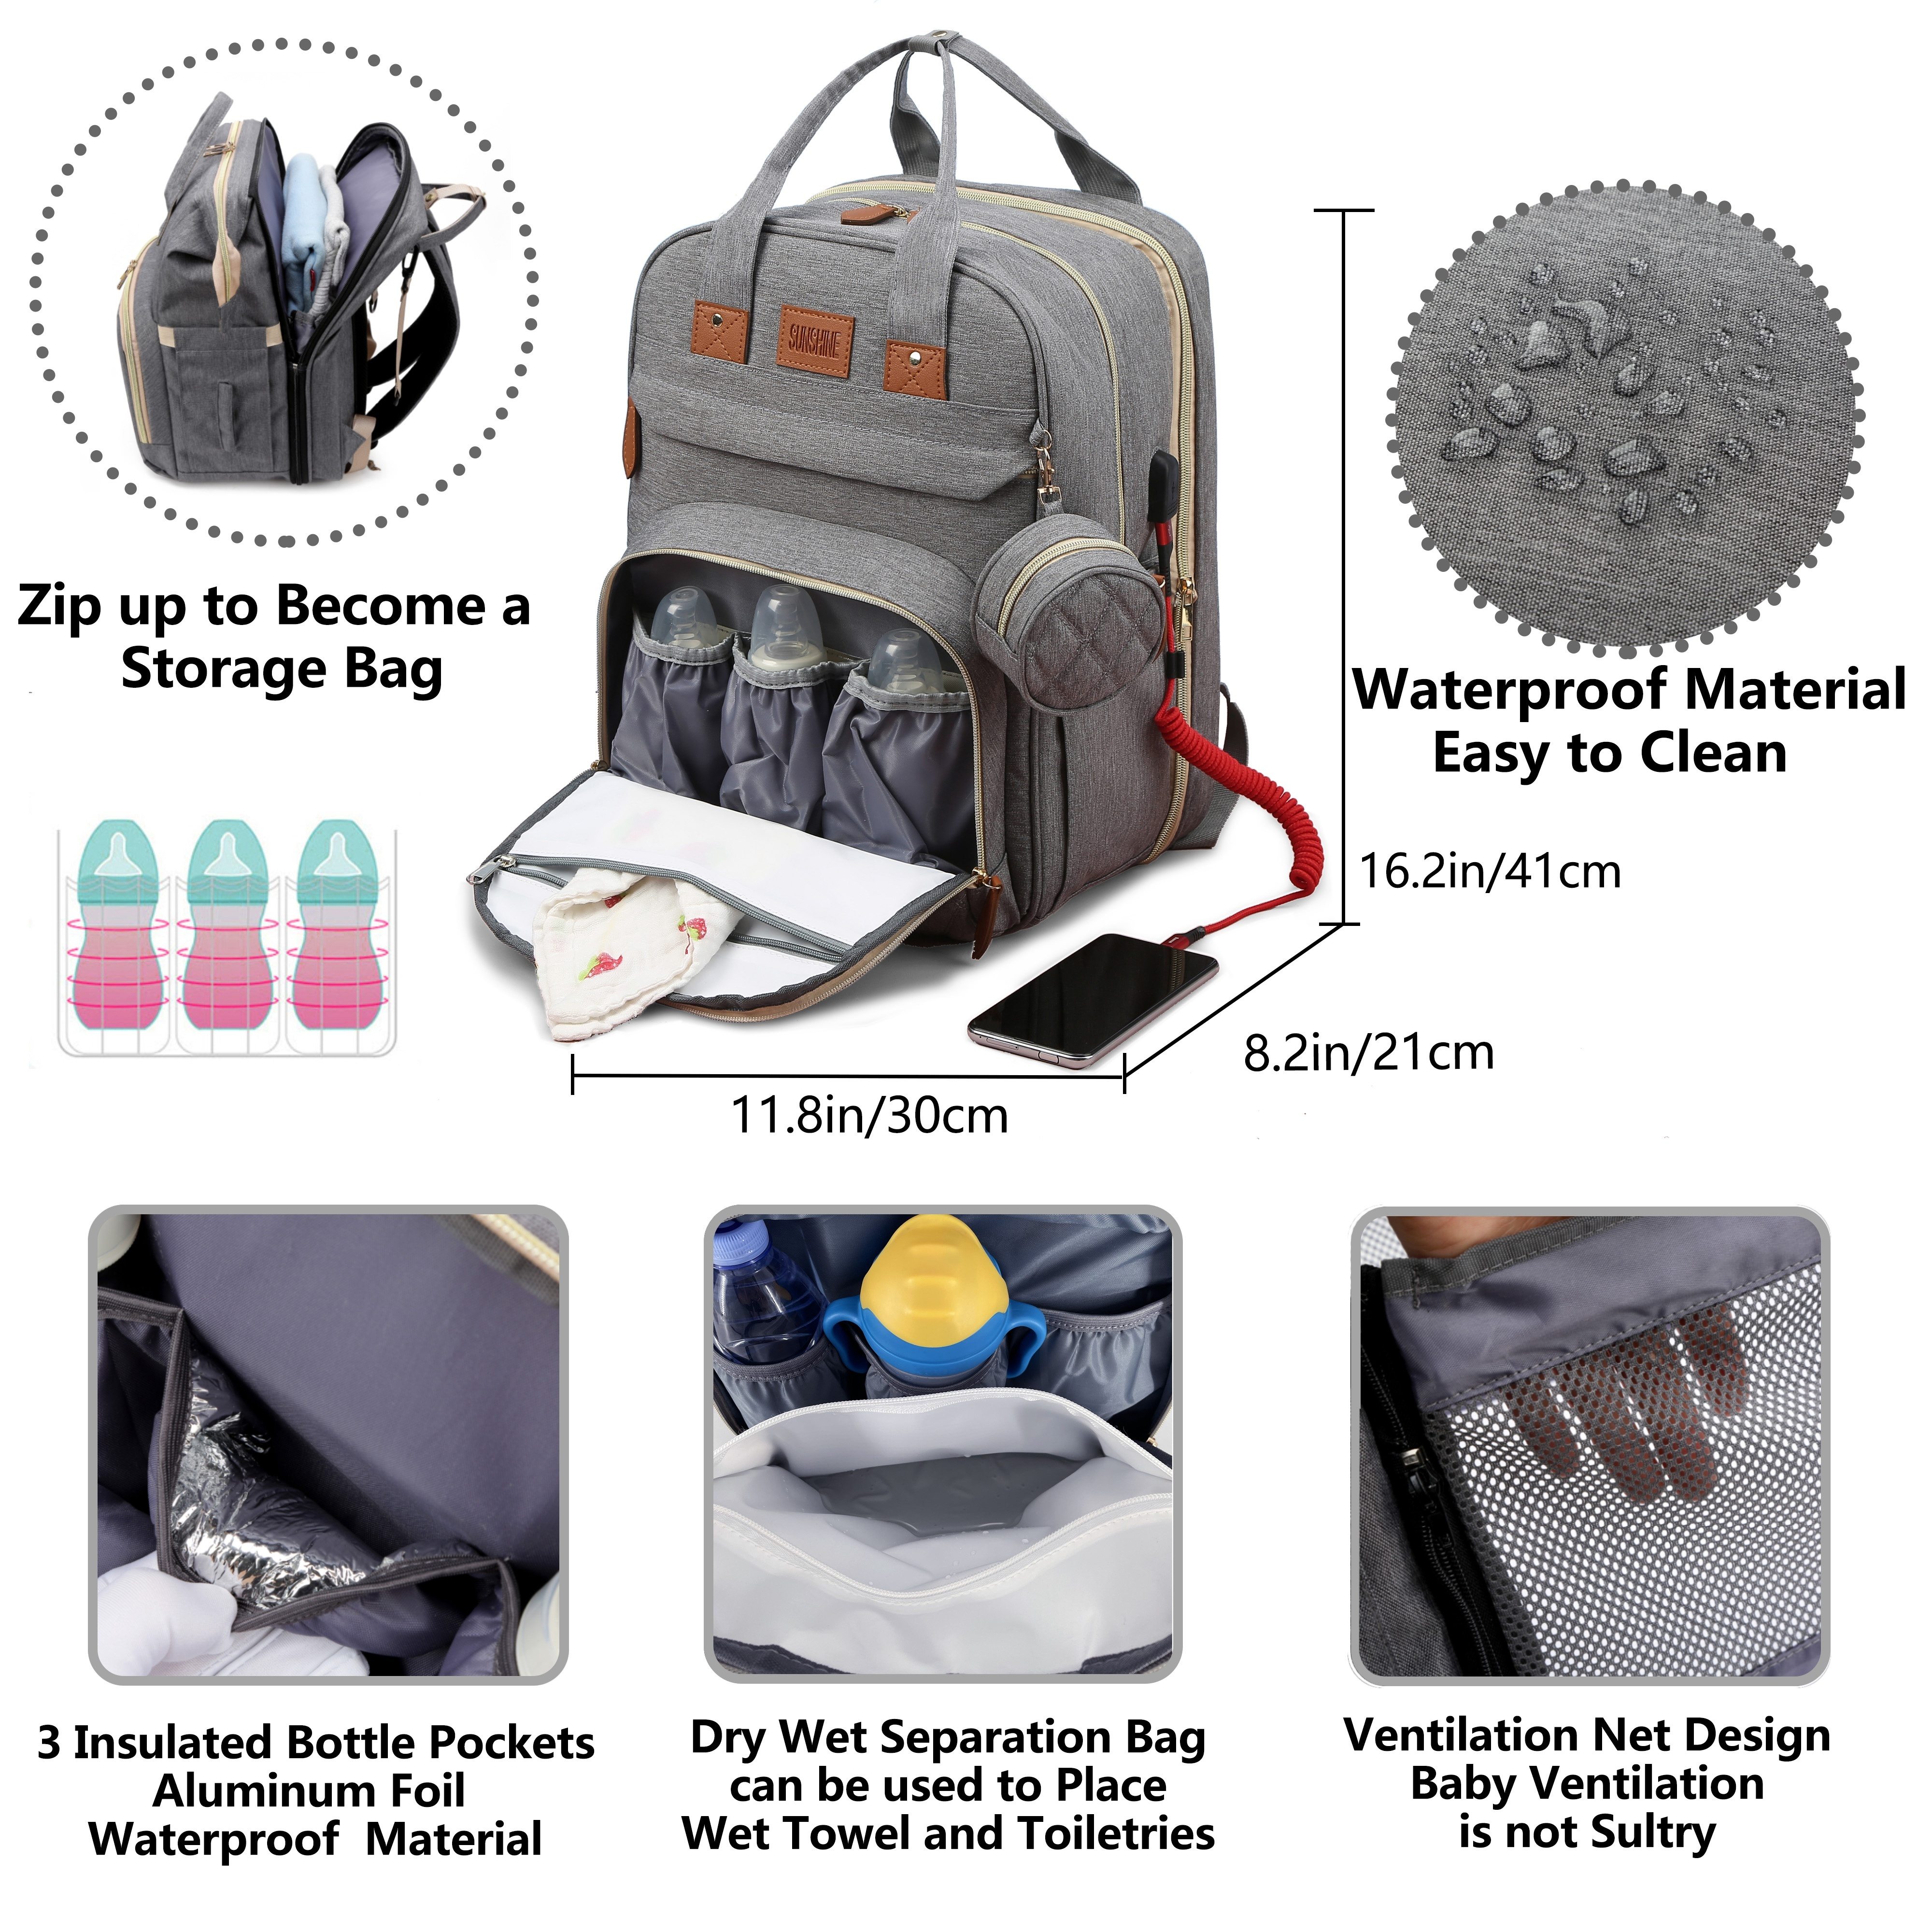 diaper bag backpack diaper changing station with usb charging port multi functional mom travel baby diaper bag large capacity diaper backpack with changing pad baby bag for moms dads baby registry search shower gifts waterproof and stylish details 2